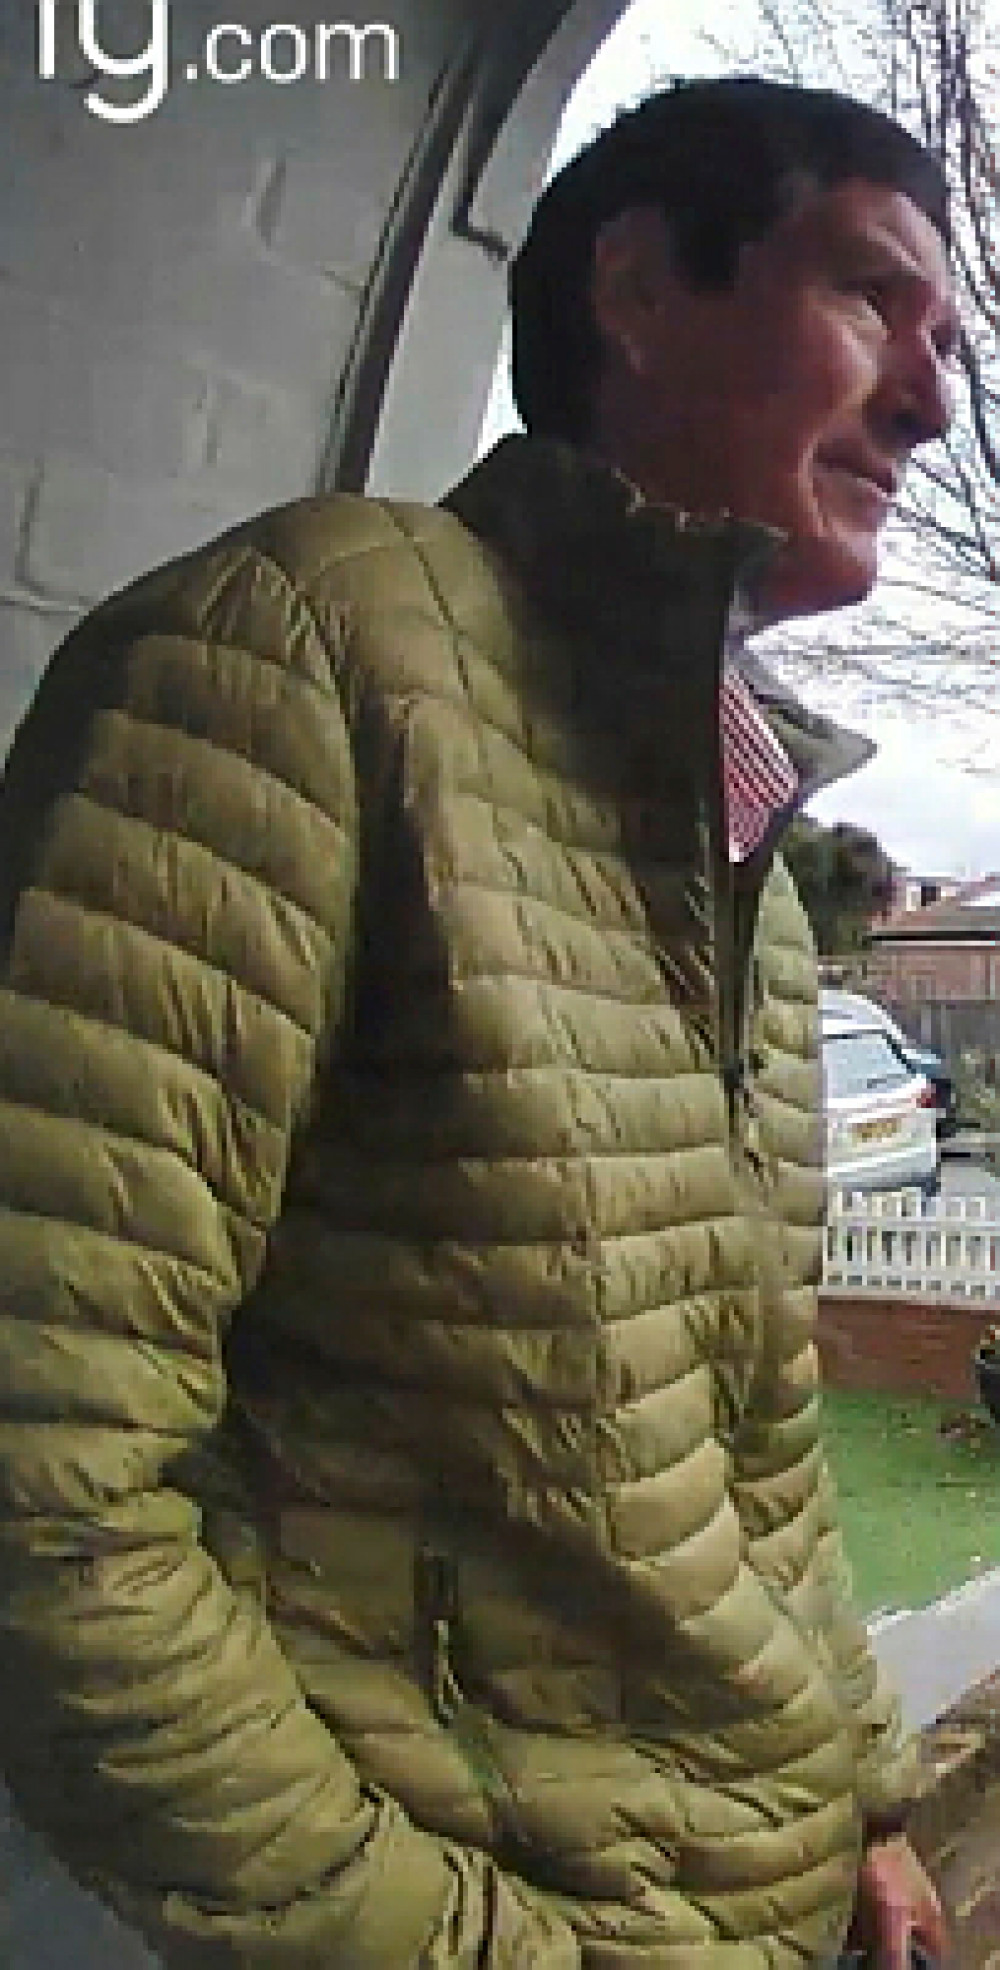 The police have issued an appeal to the public to help identify a man implicated in a series of burglaries.